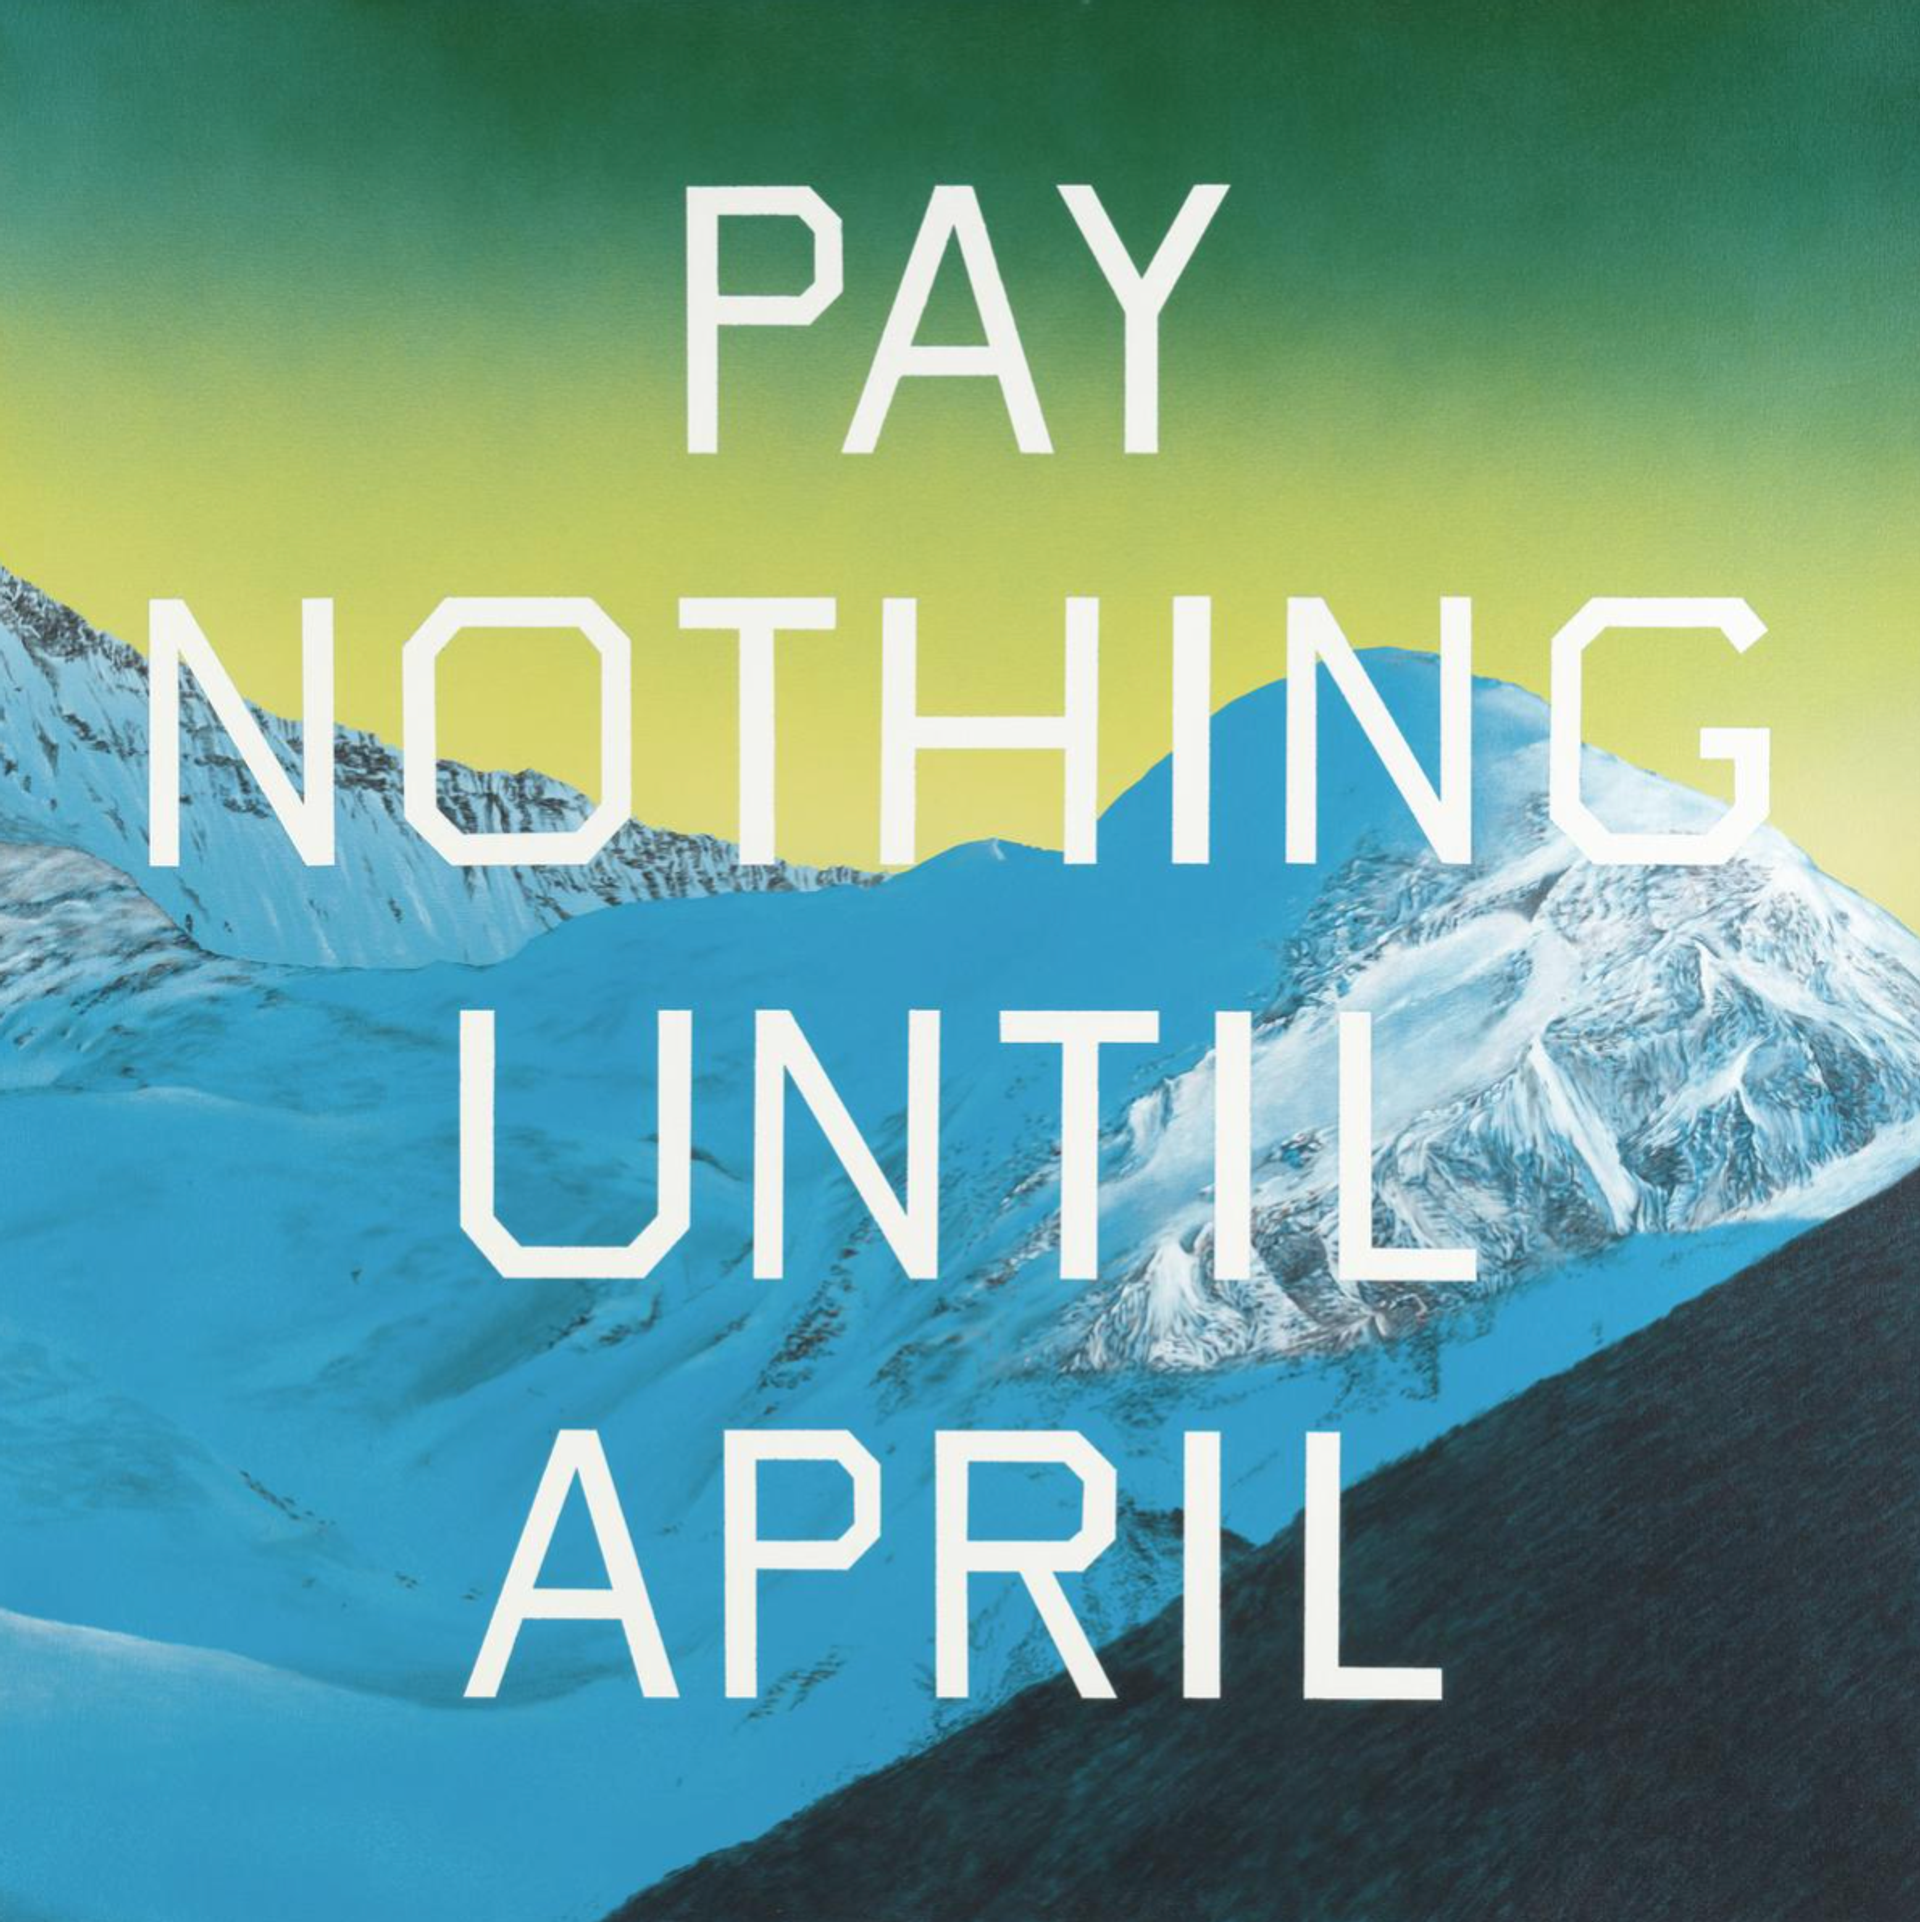 Painting by Ed Ruscha, depicting the words 'Pay Nothing Until April' in capitalised, white lettering against a backdrop of snowy blue mountains and a yellow-green sky.